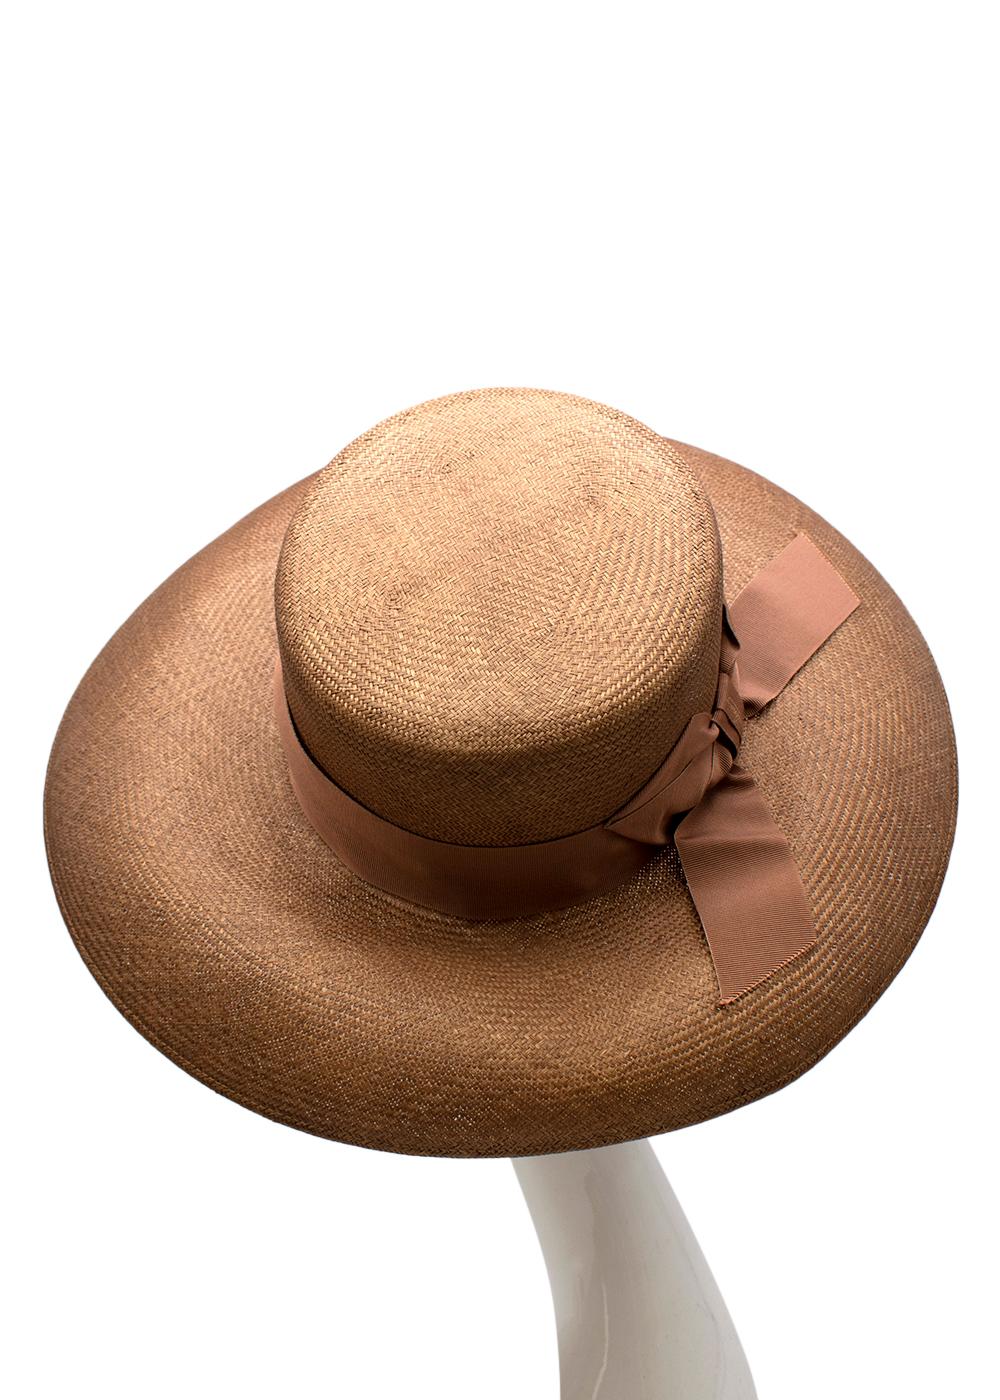 Borsalino Sophie Panama Semi Crochet Hat - Size L In Excellent Condition For Sale In London, GB